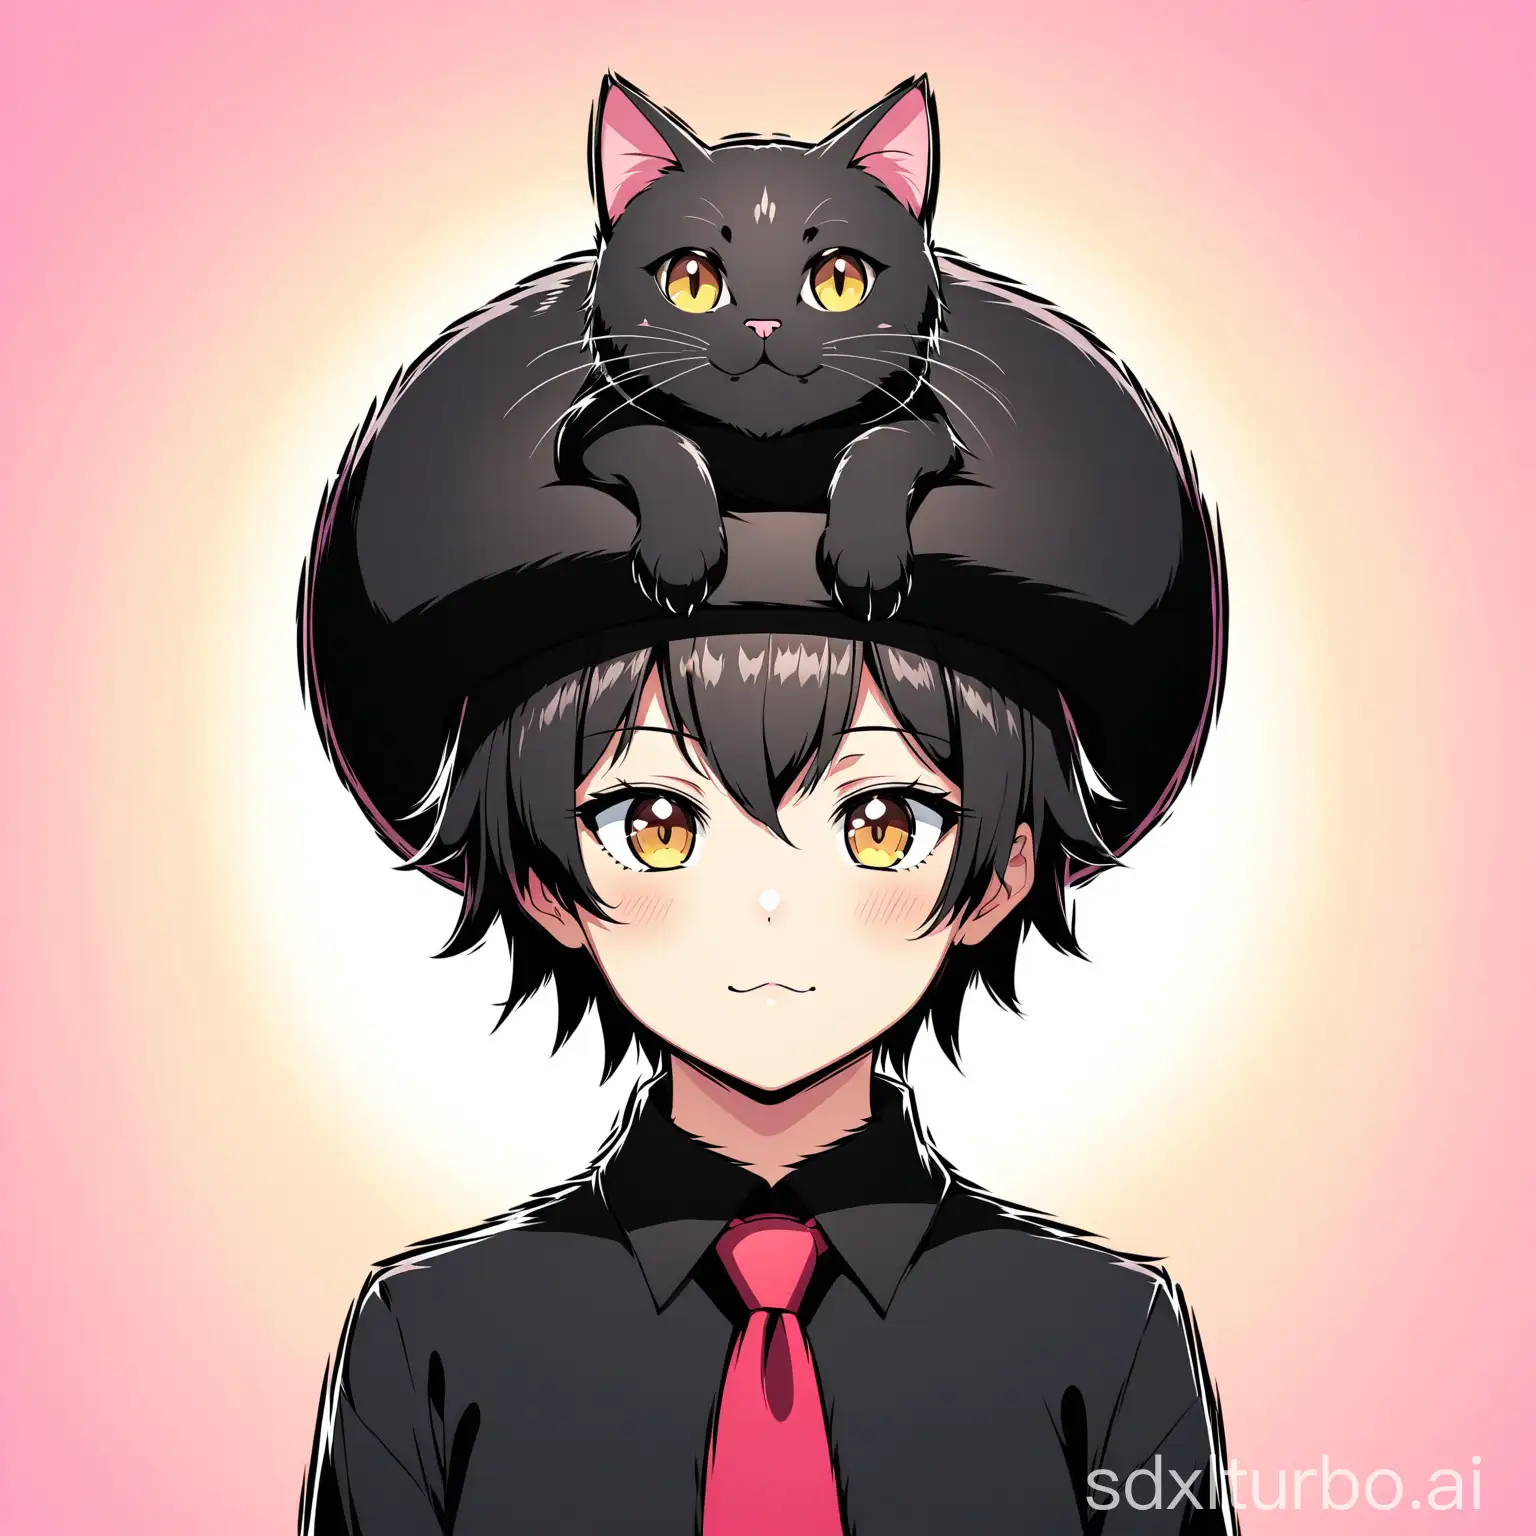 Black cat with Rubin on the head